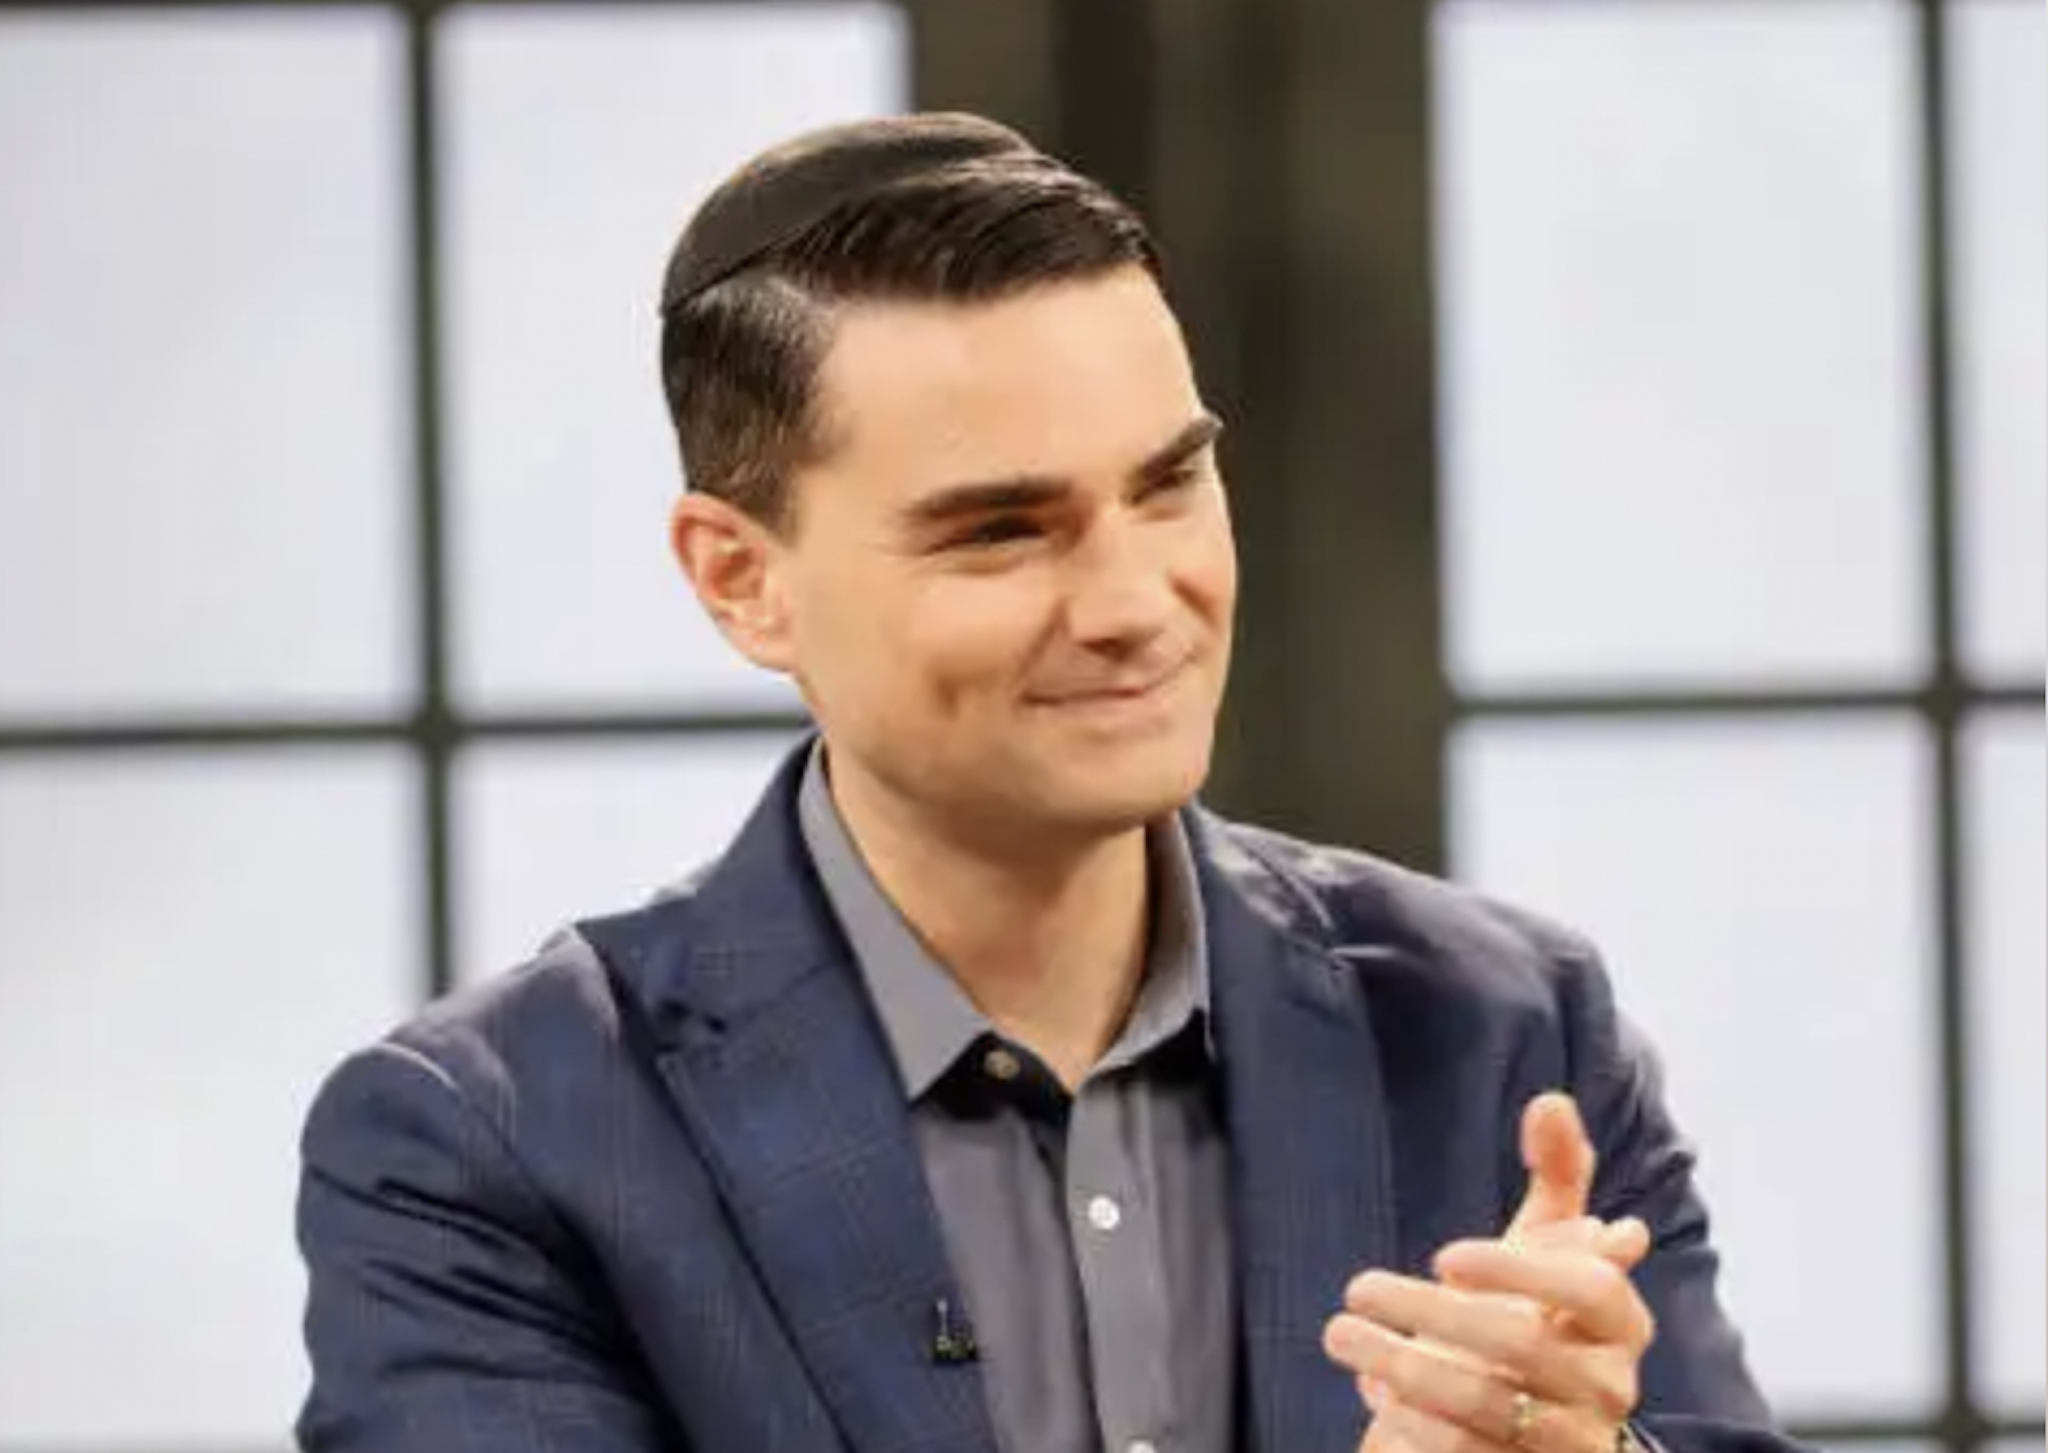 Podcast Movement apologized for its poor treatment of The Daily Wire's Ben Shapiro at a Dallas trade show last month.